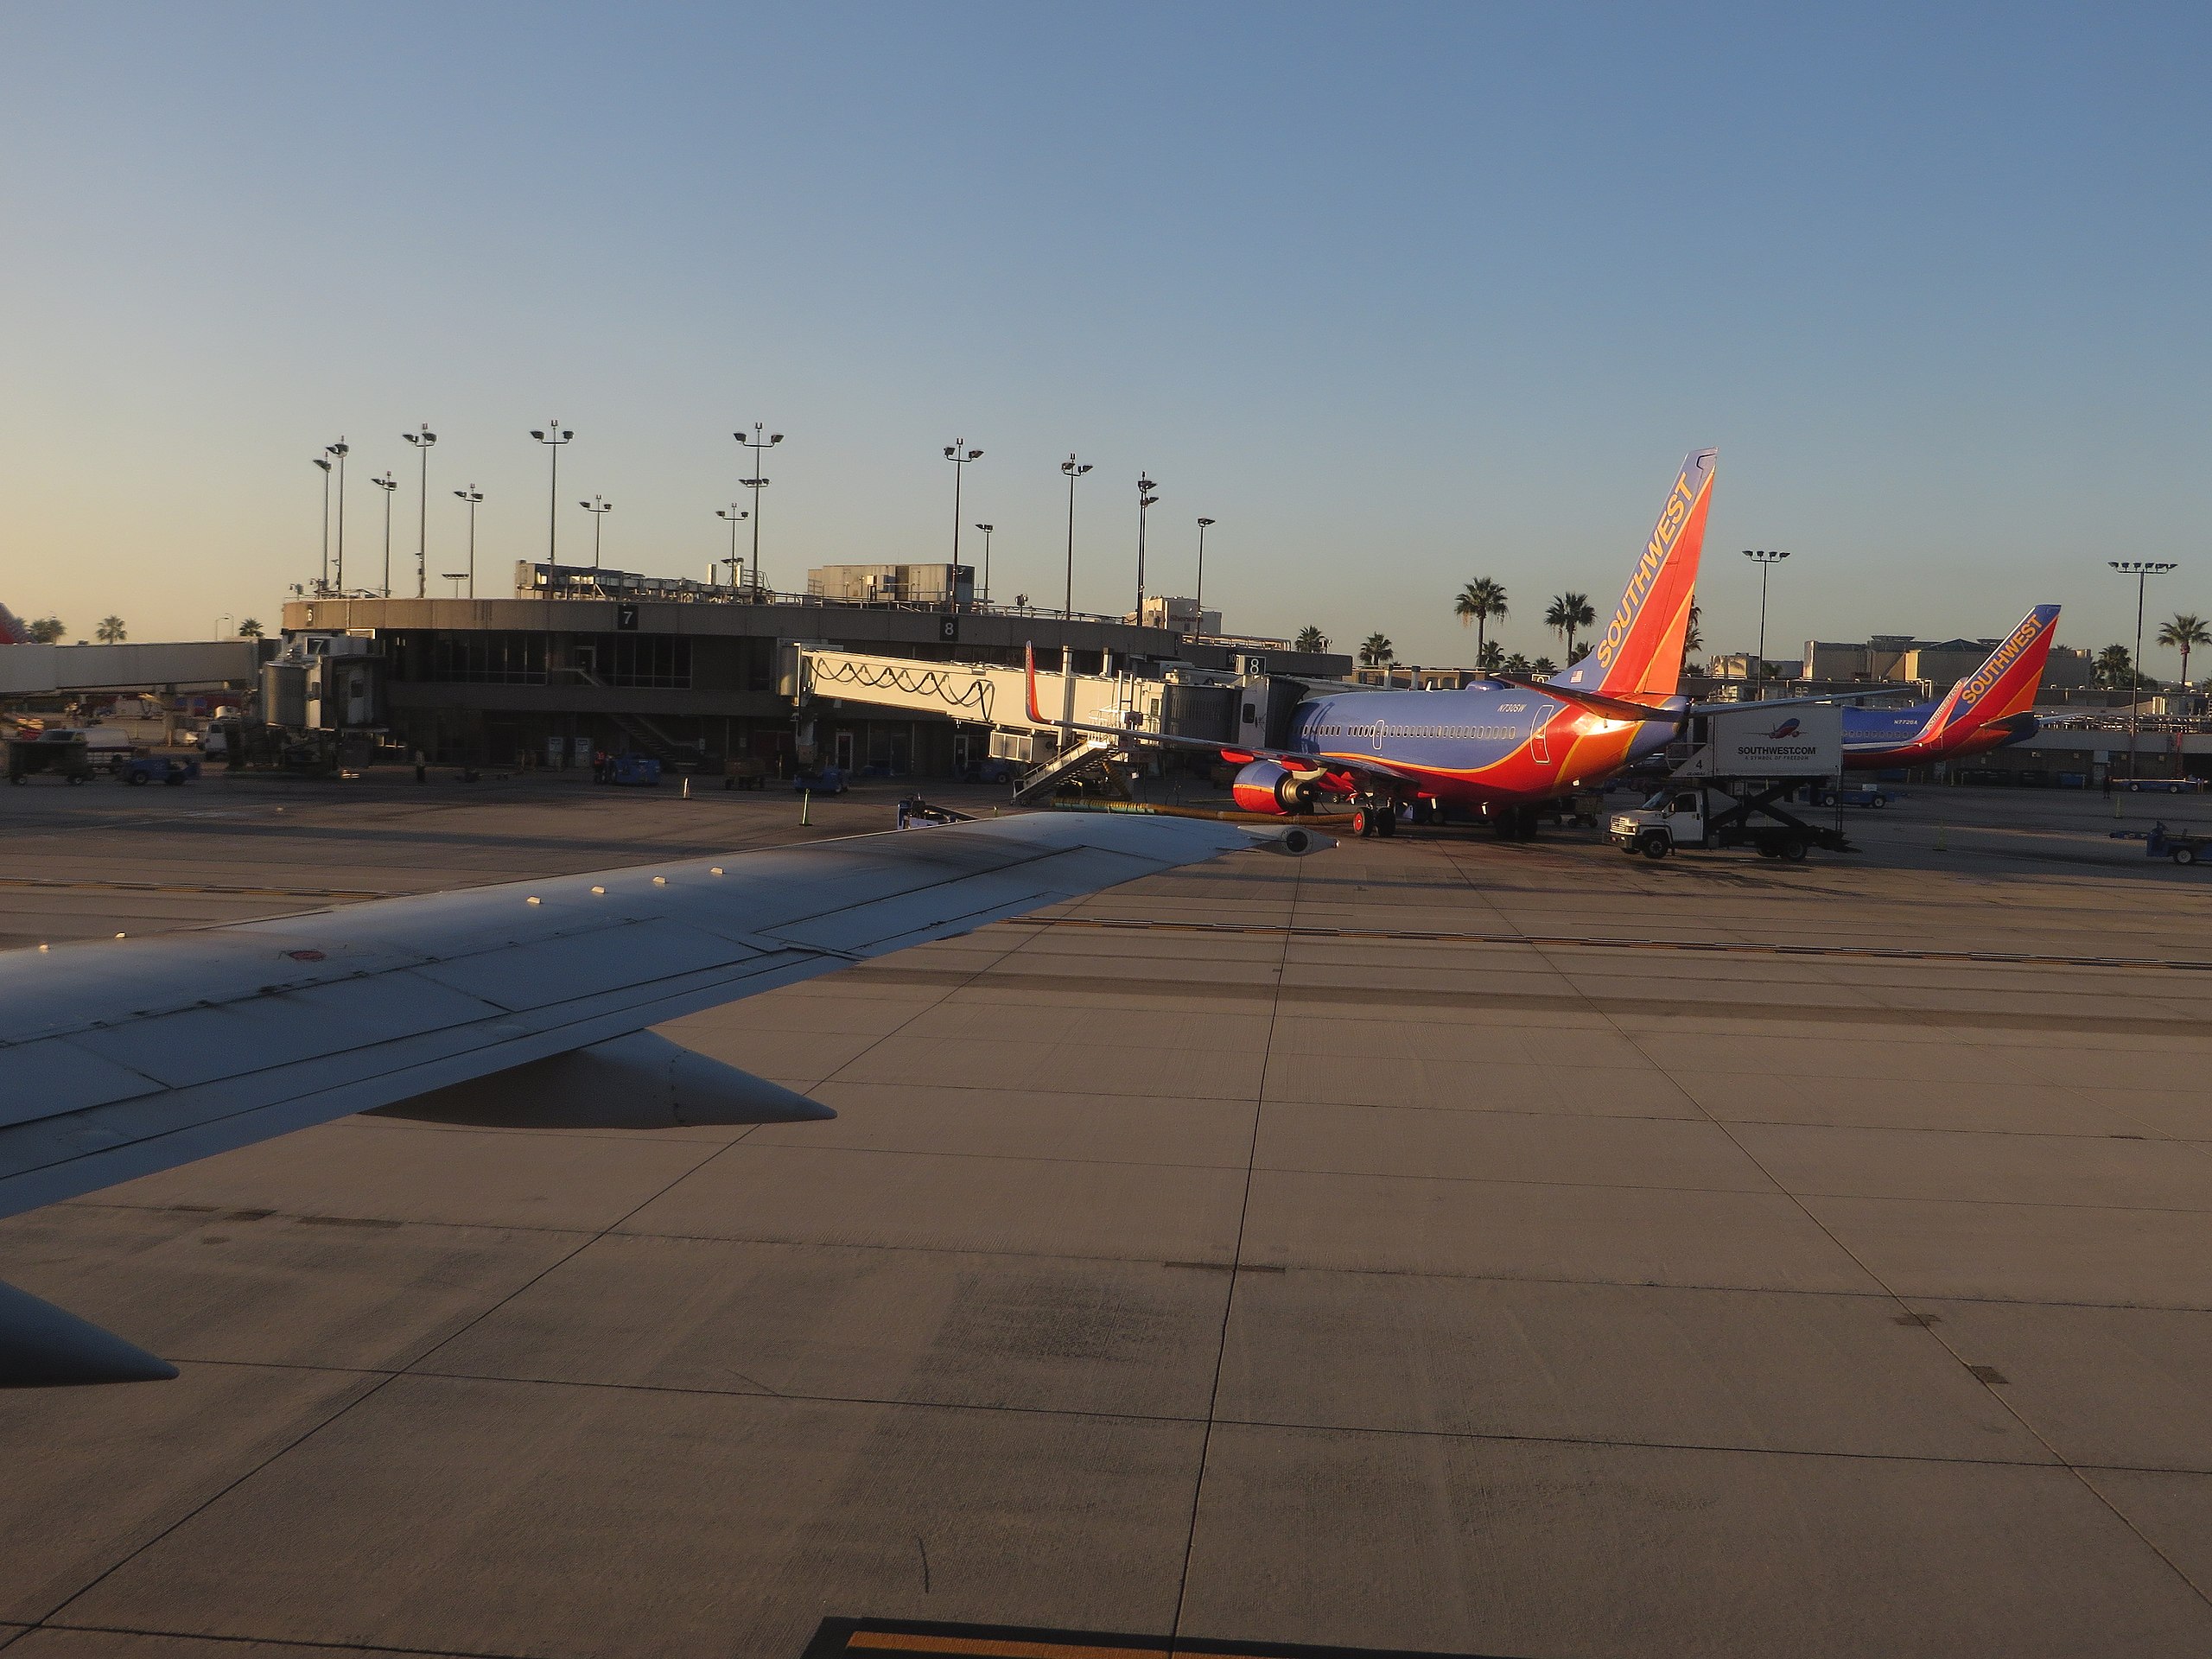 San Diego's Airport Dabbles in Post-COVID Growth